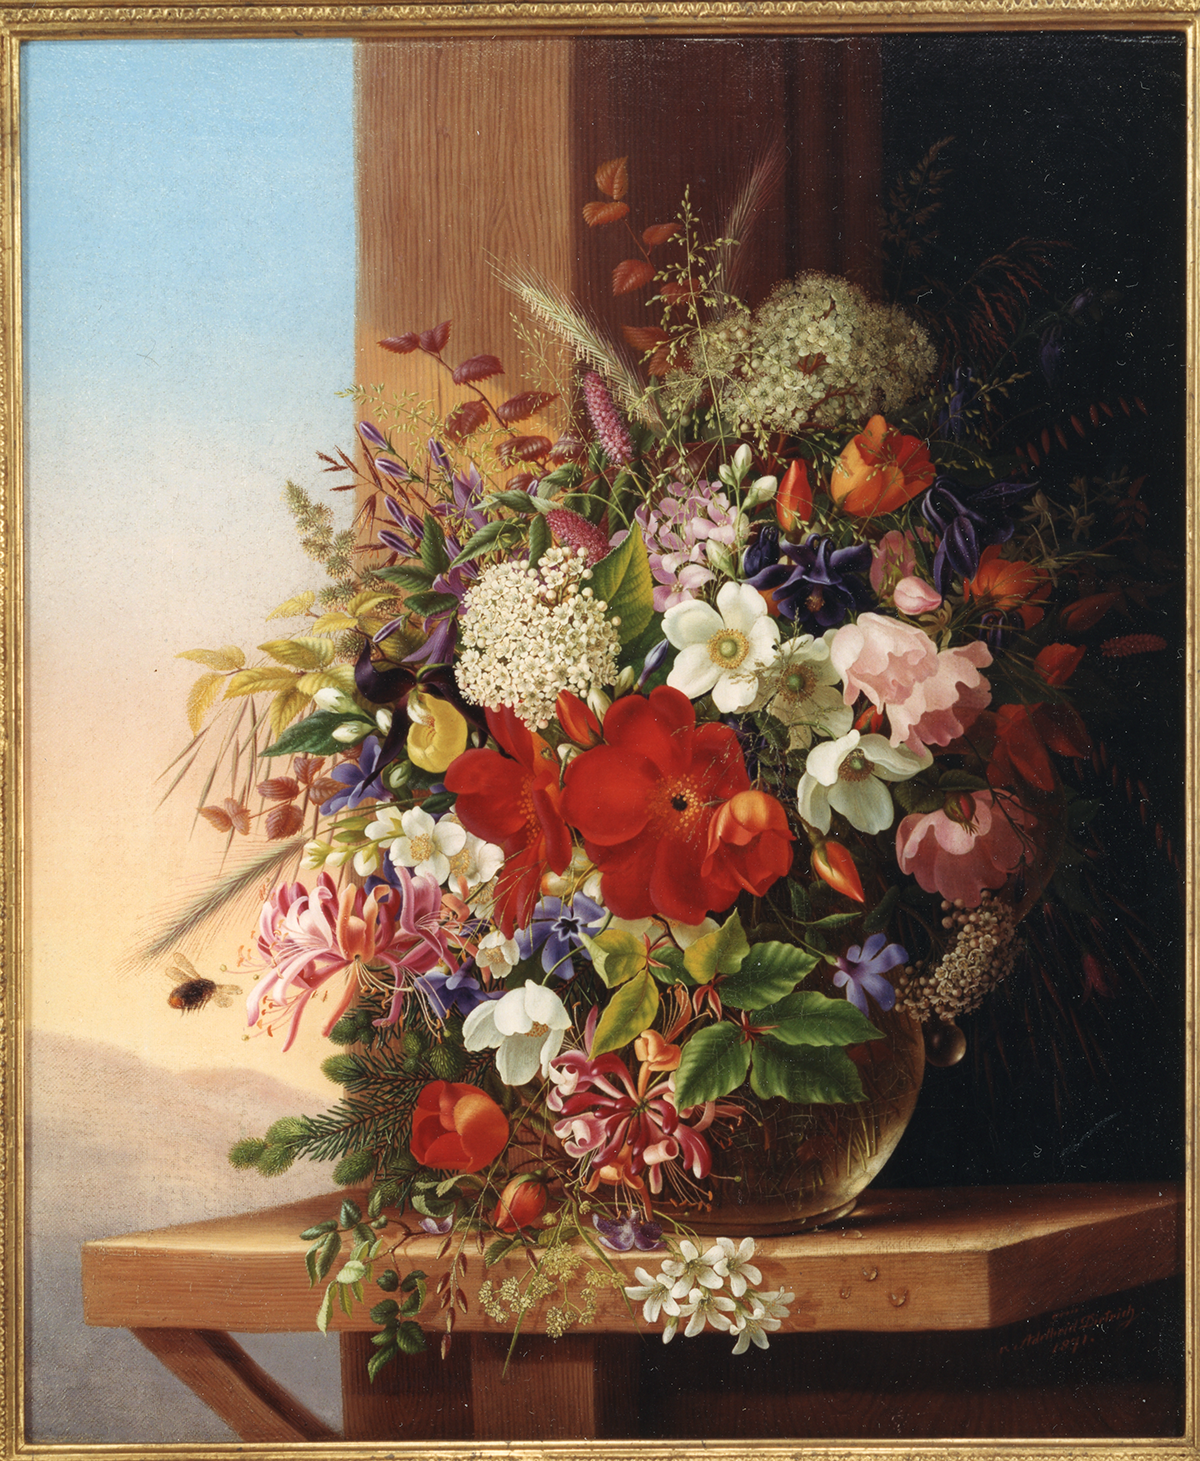 A still life painting of a large bouquet of flowers and a bee.